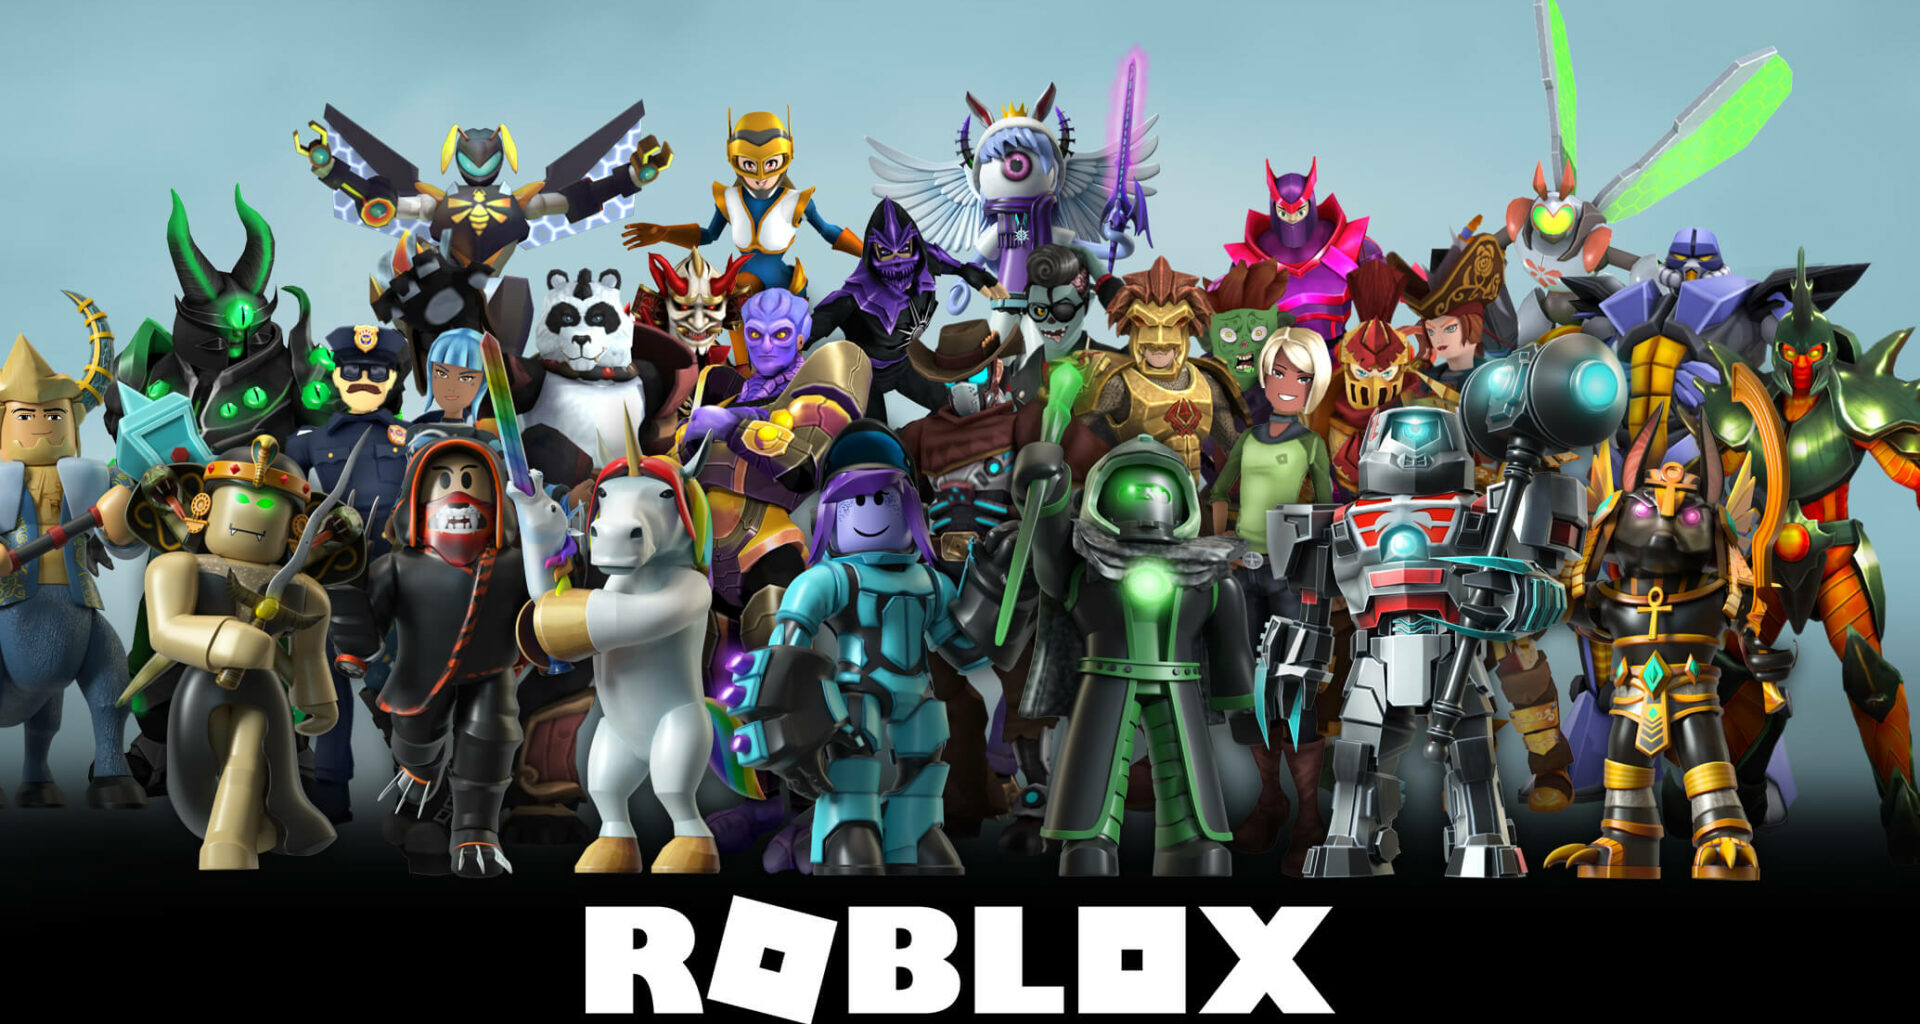 Download Roblox Apk For Free If You Can T Get Minecraft Apk Legally - tips roblox studio unblocked player minecraft game apk